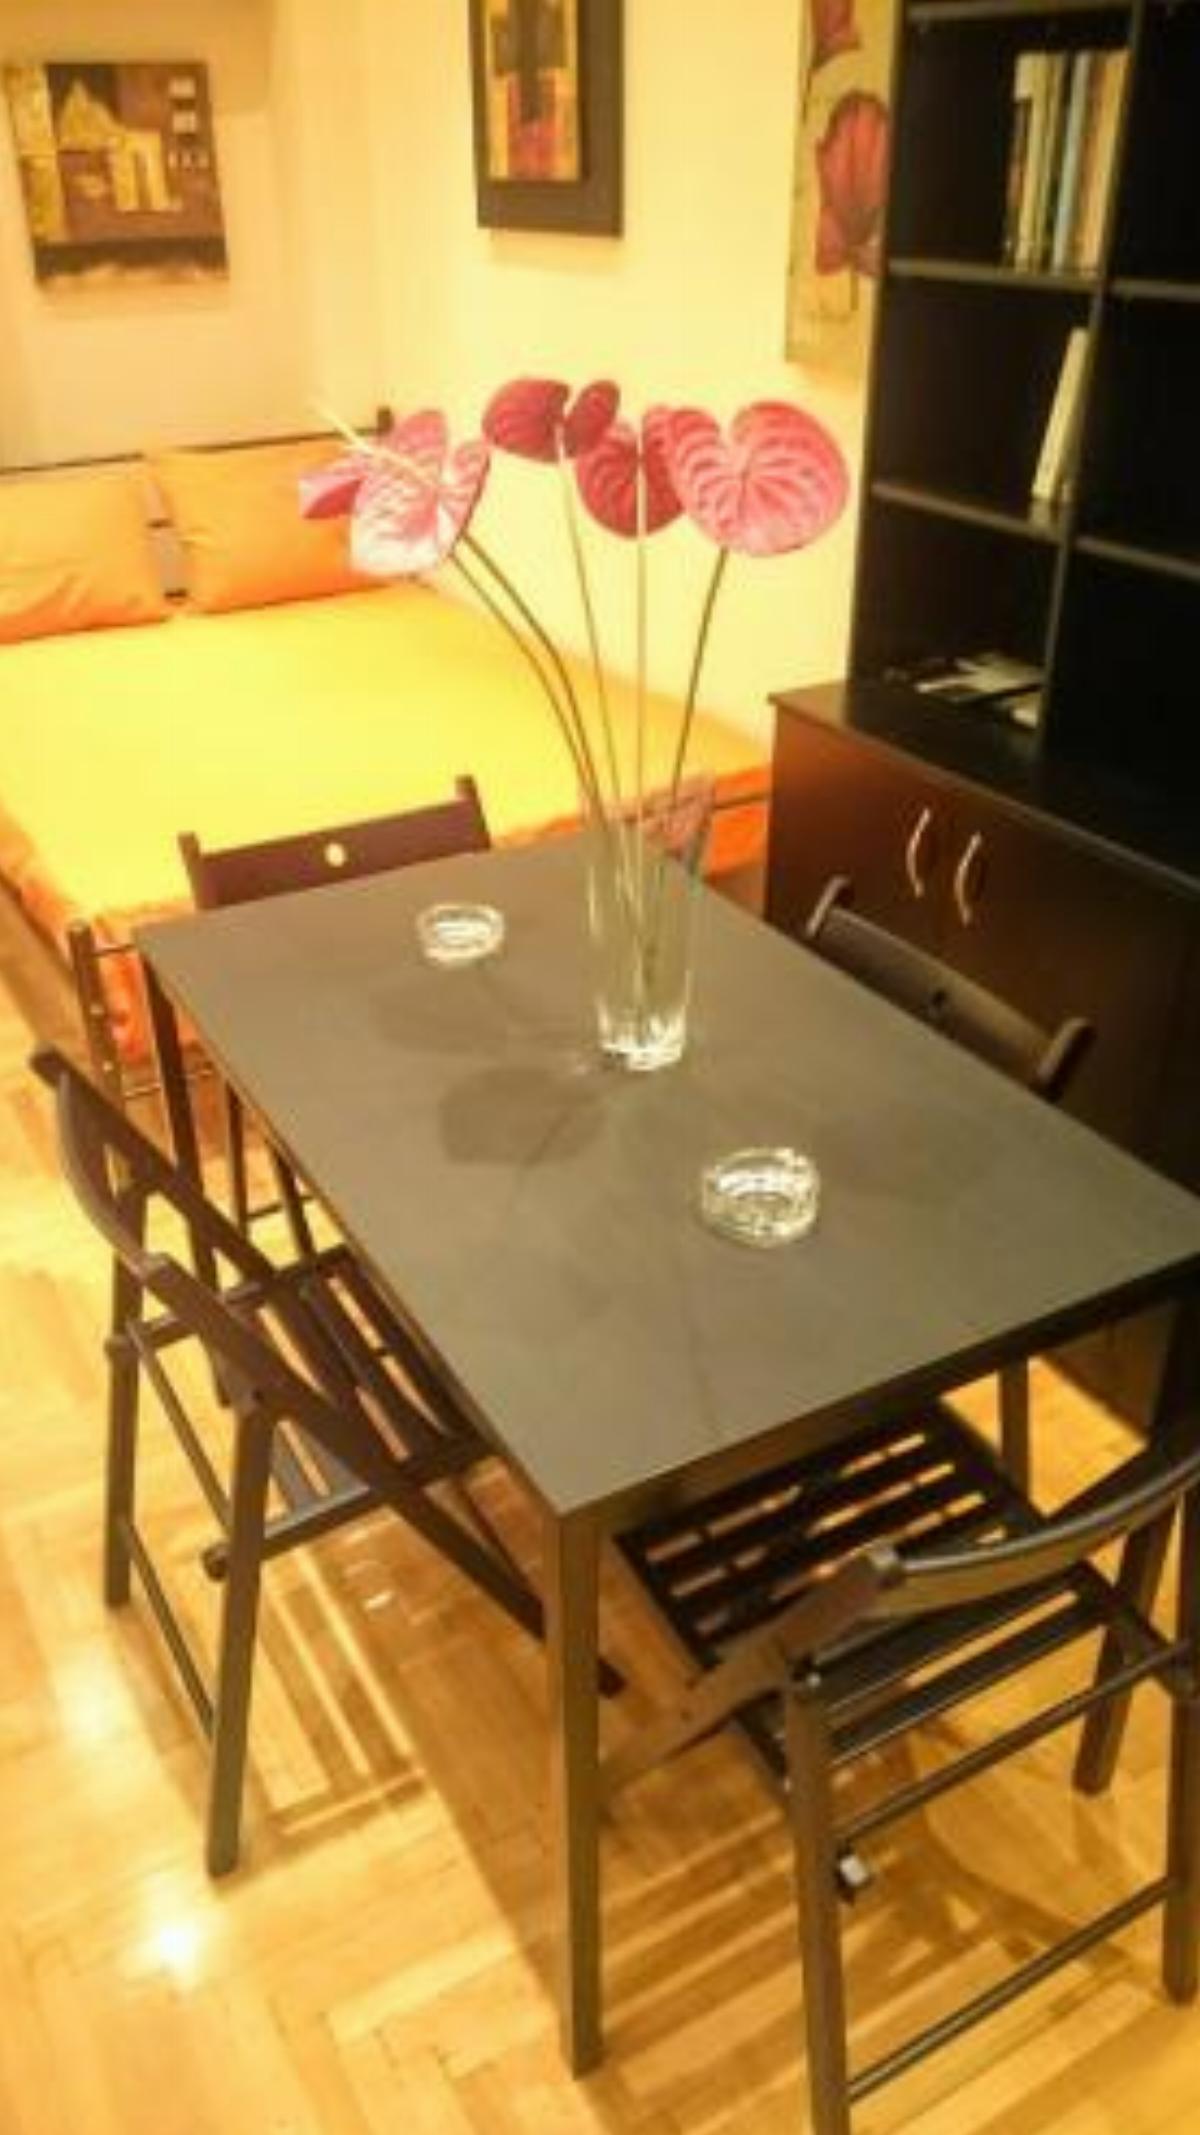 Modern apartment in Athens center Hotel Athens Greece